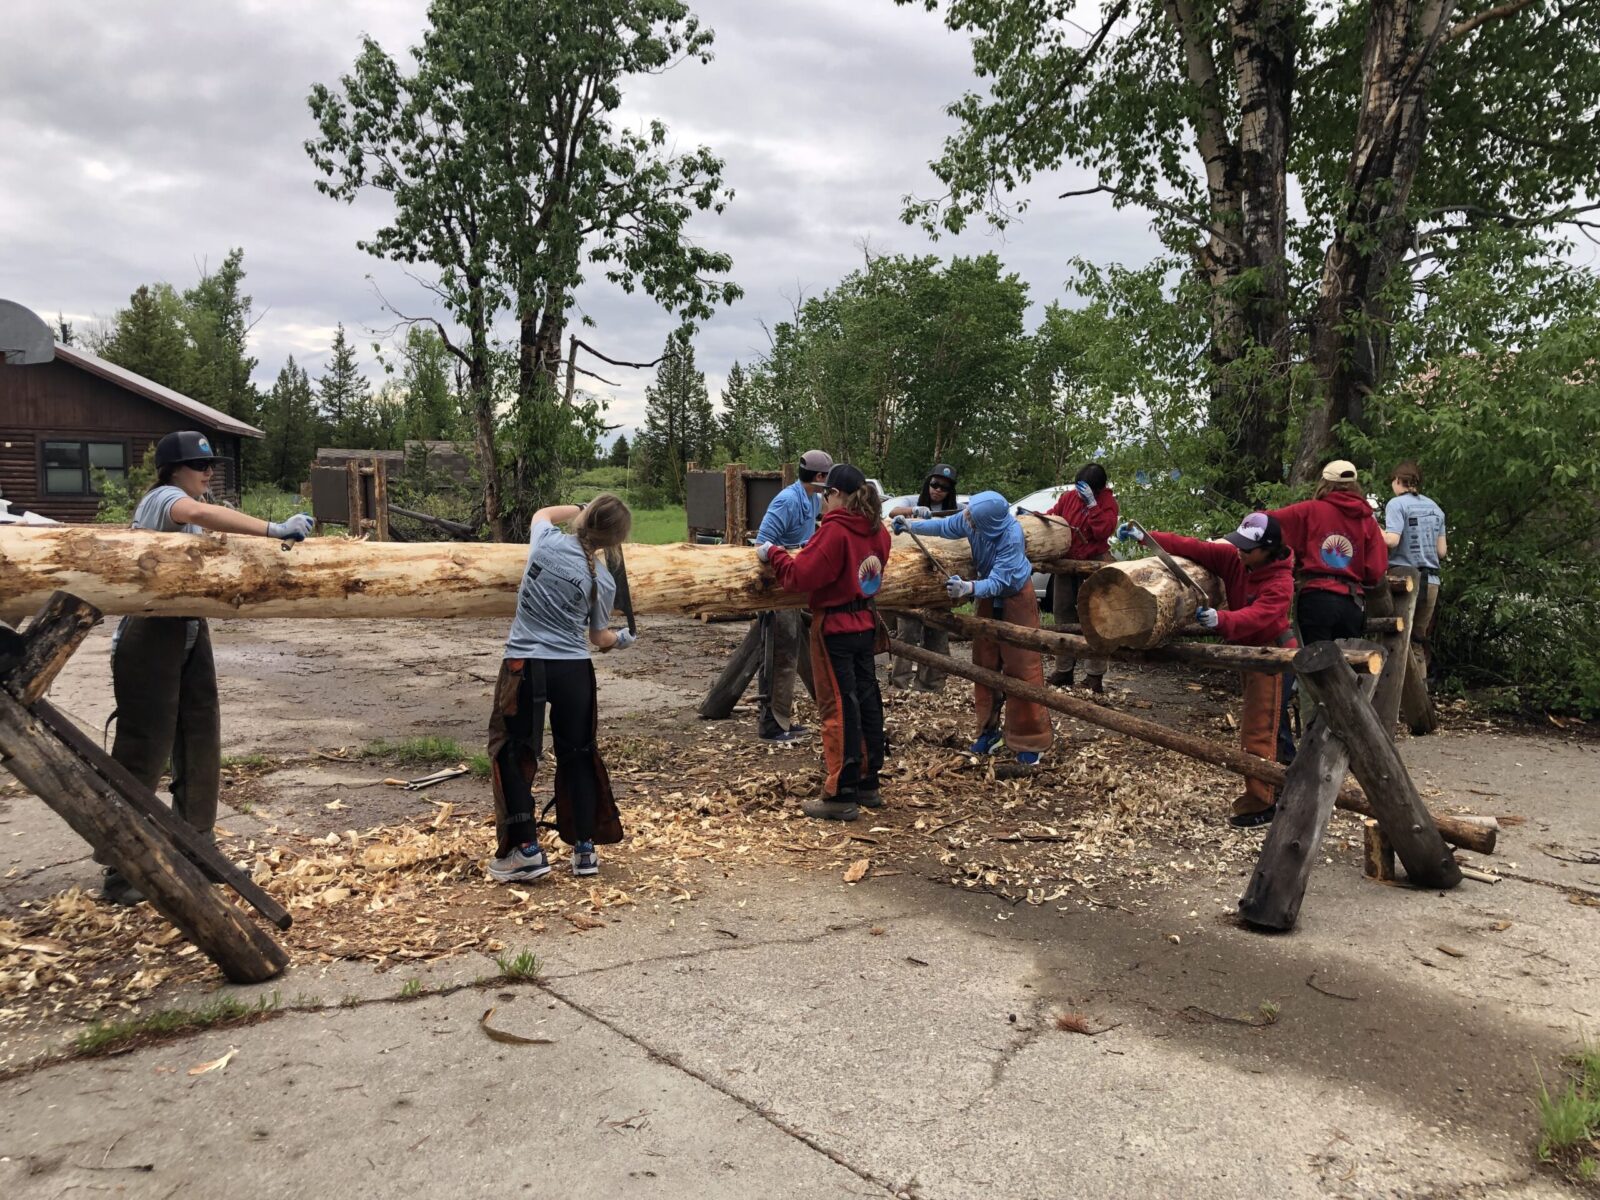 YCP learn the art of peeling logs, which will be used for a bridge project this summer.